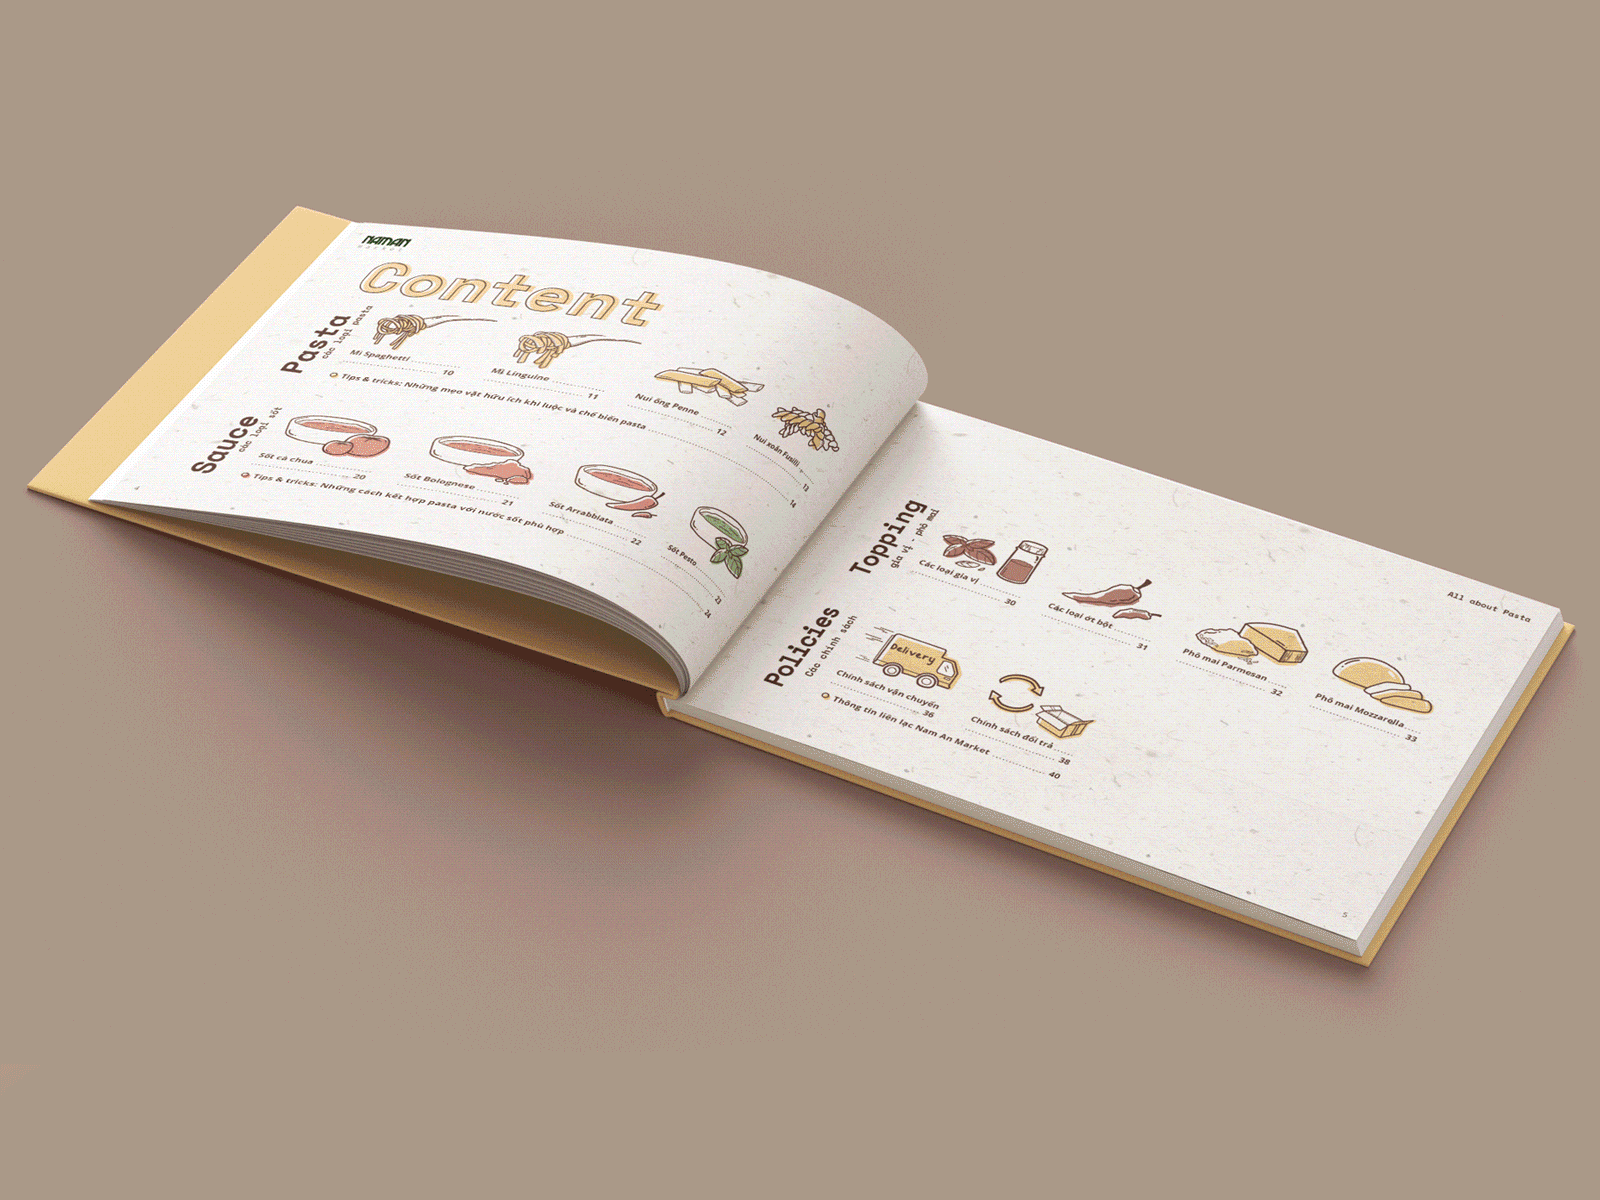 All about Pasta | Catalog booklet catalogue design editorial food illustration graphic design illustration layout pasta illustration